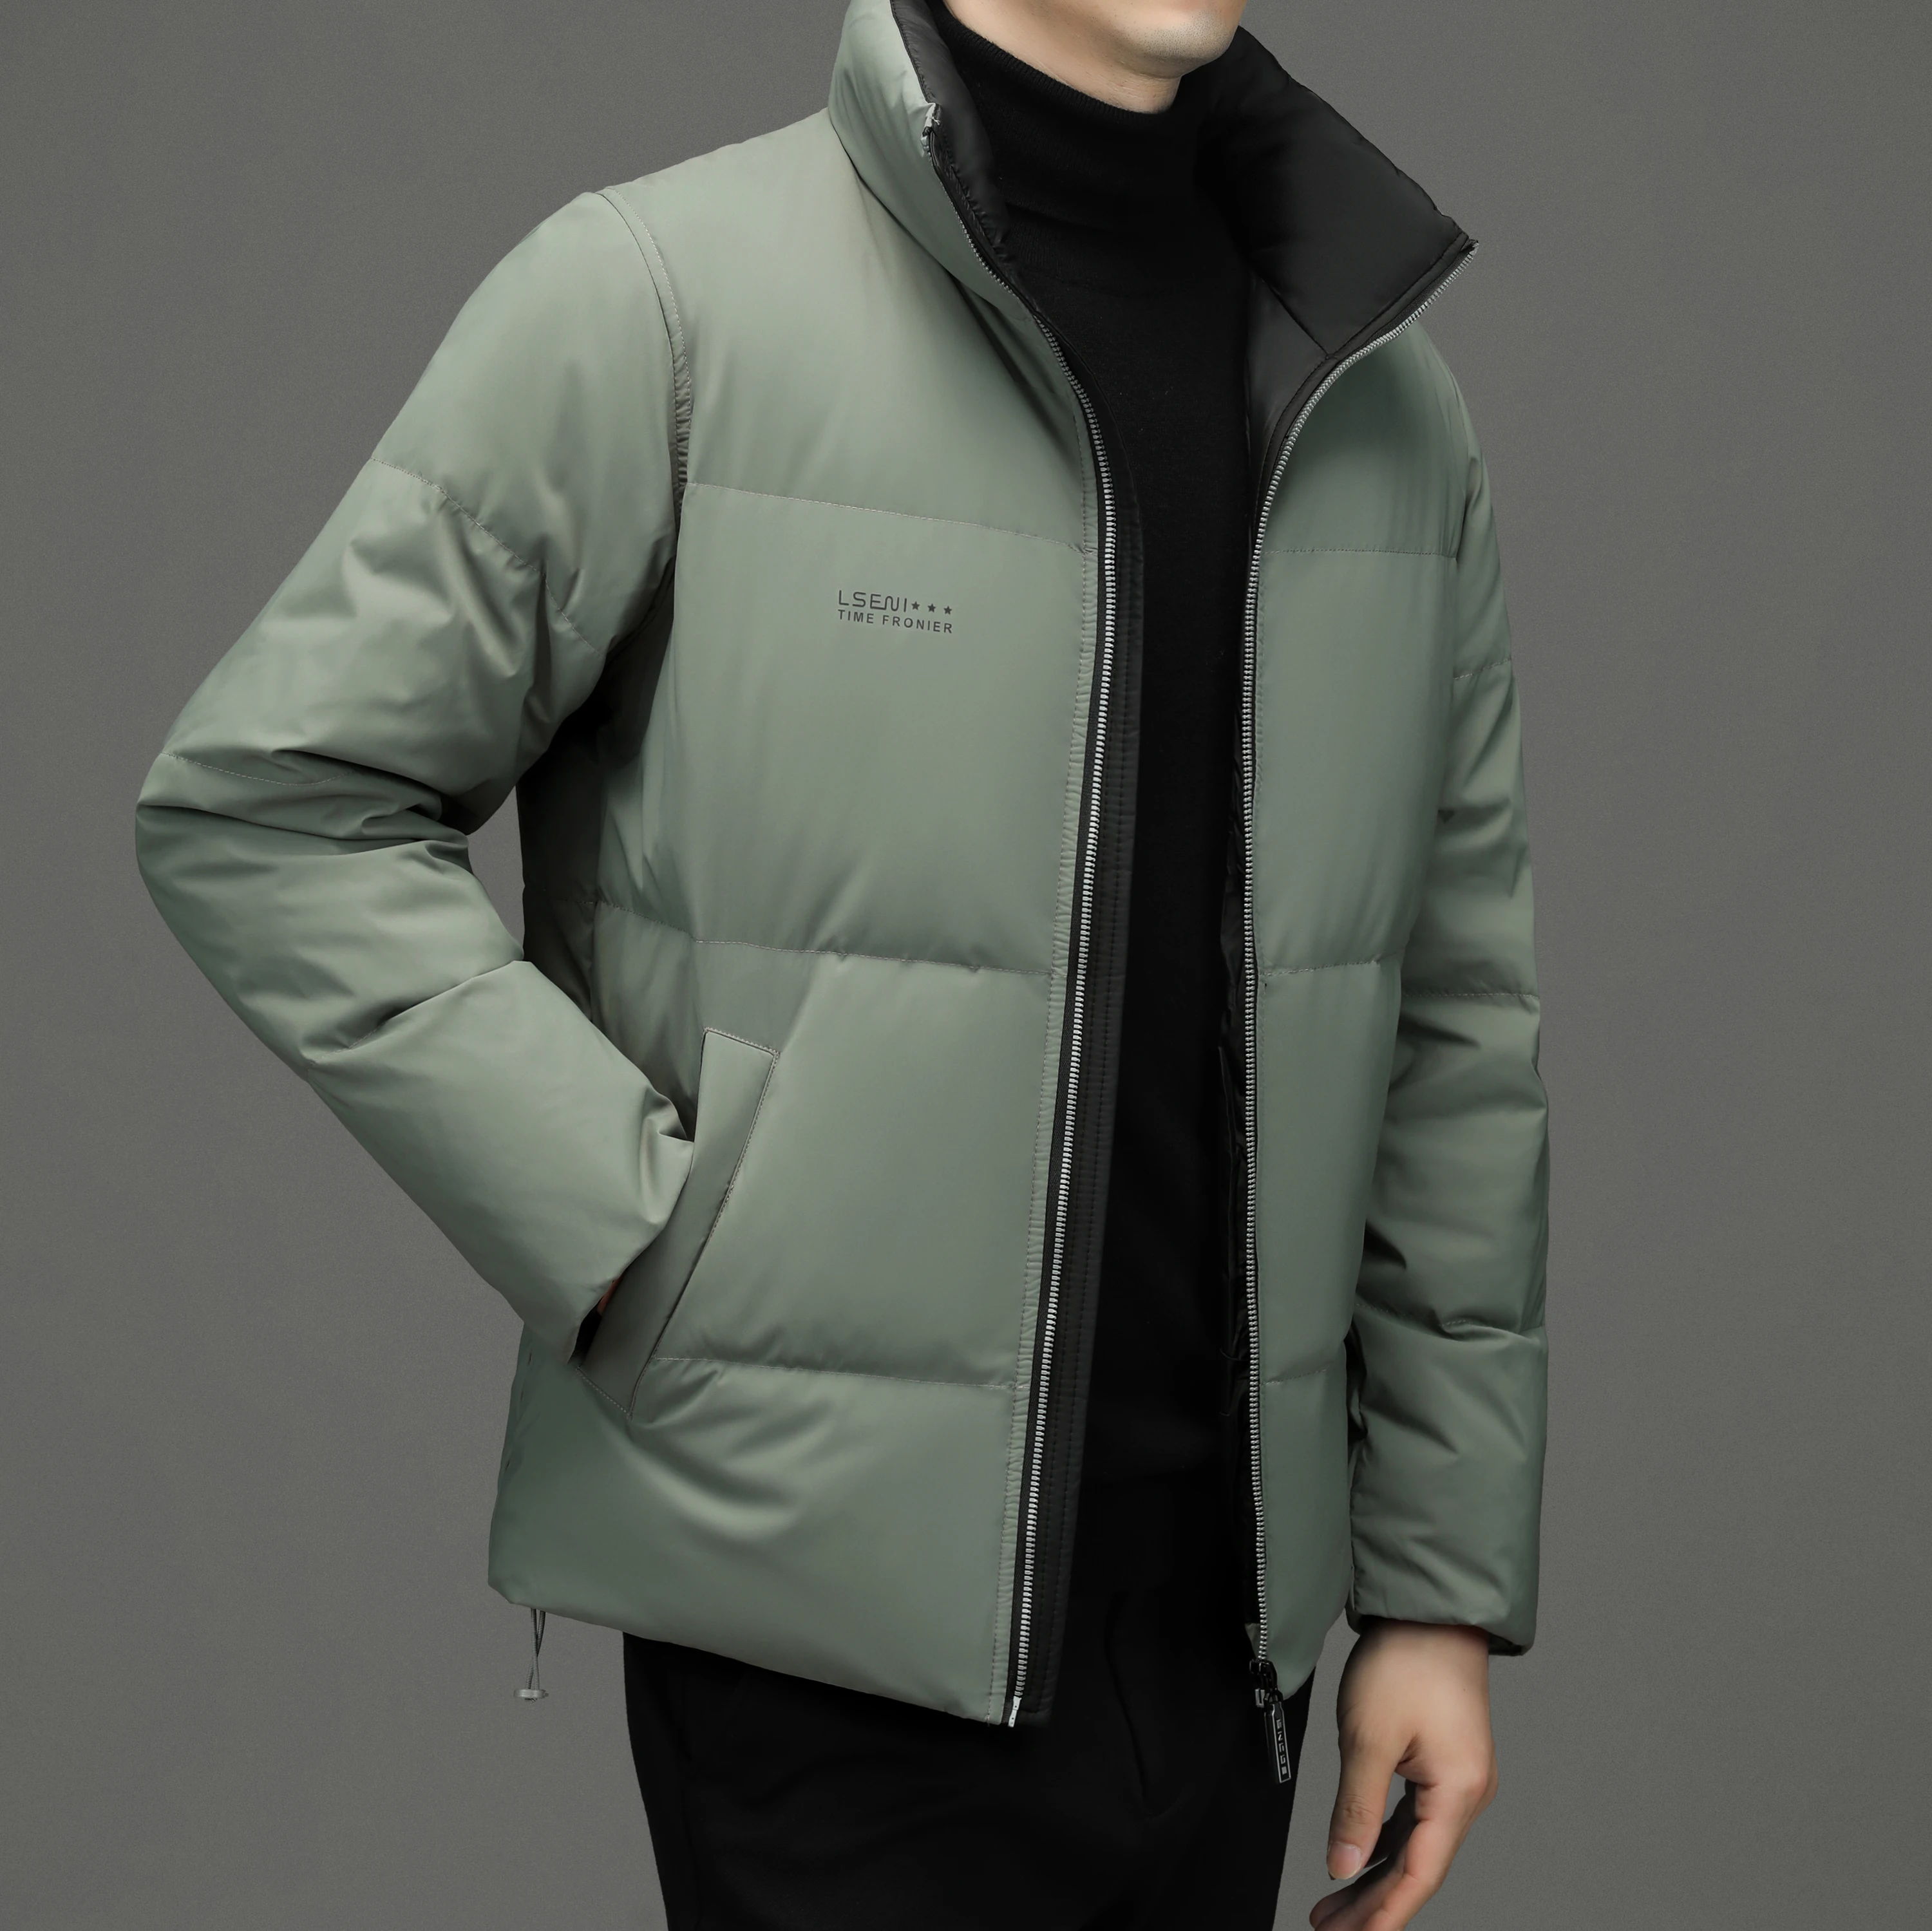 Men's Yellow Duck Down Jacket men's stand collar thickened down jacket Fashion high quality coat warm winter parka men